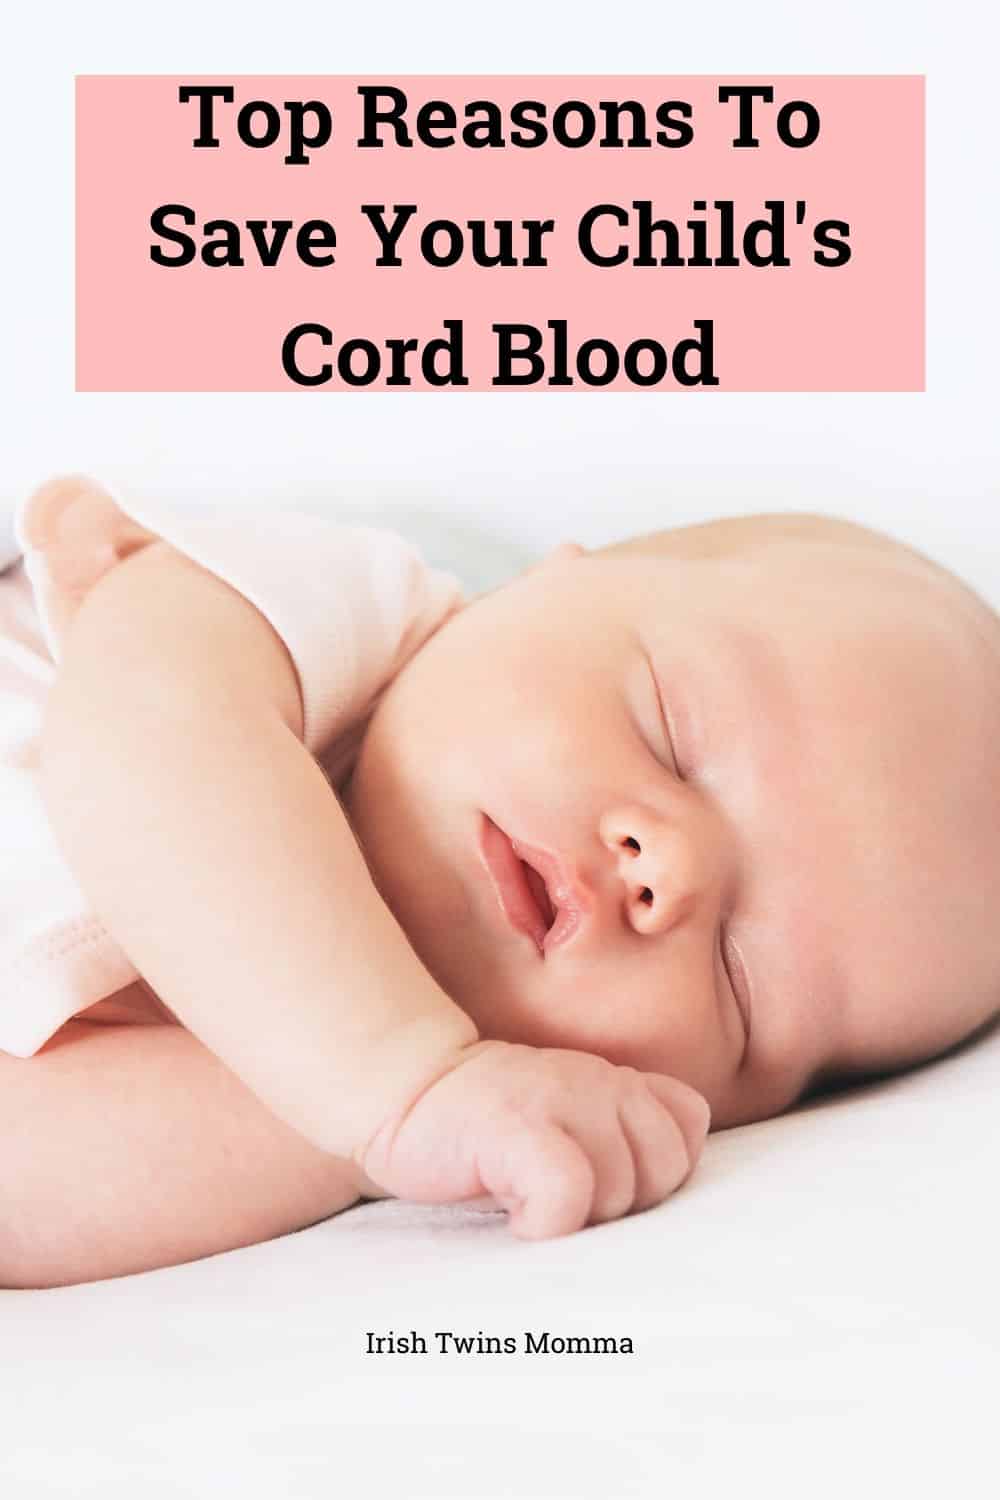 Top Reasons To Save Your Child's Cord Blood